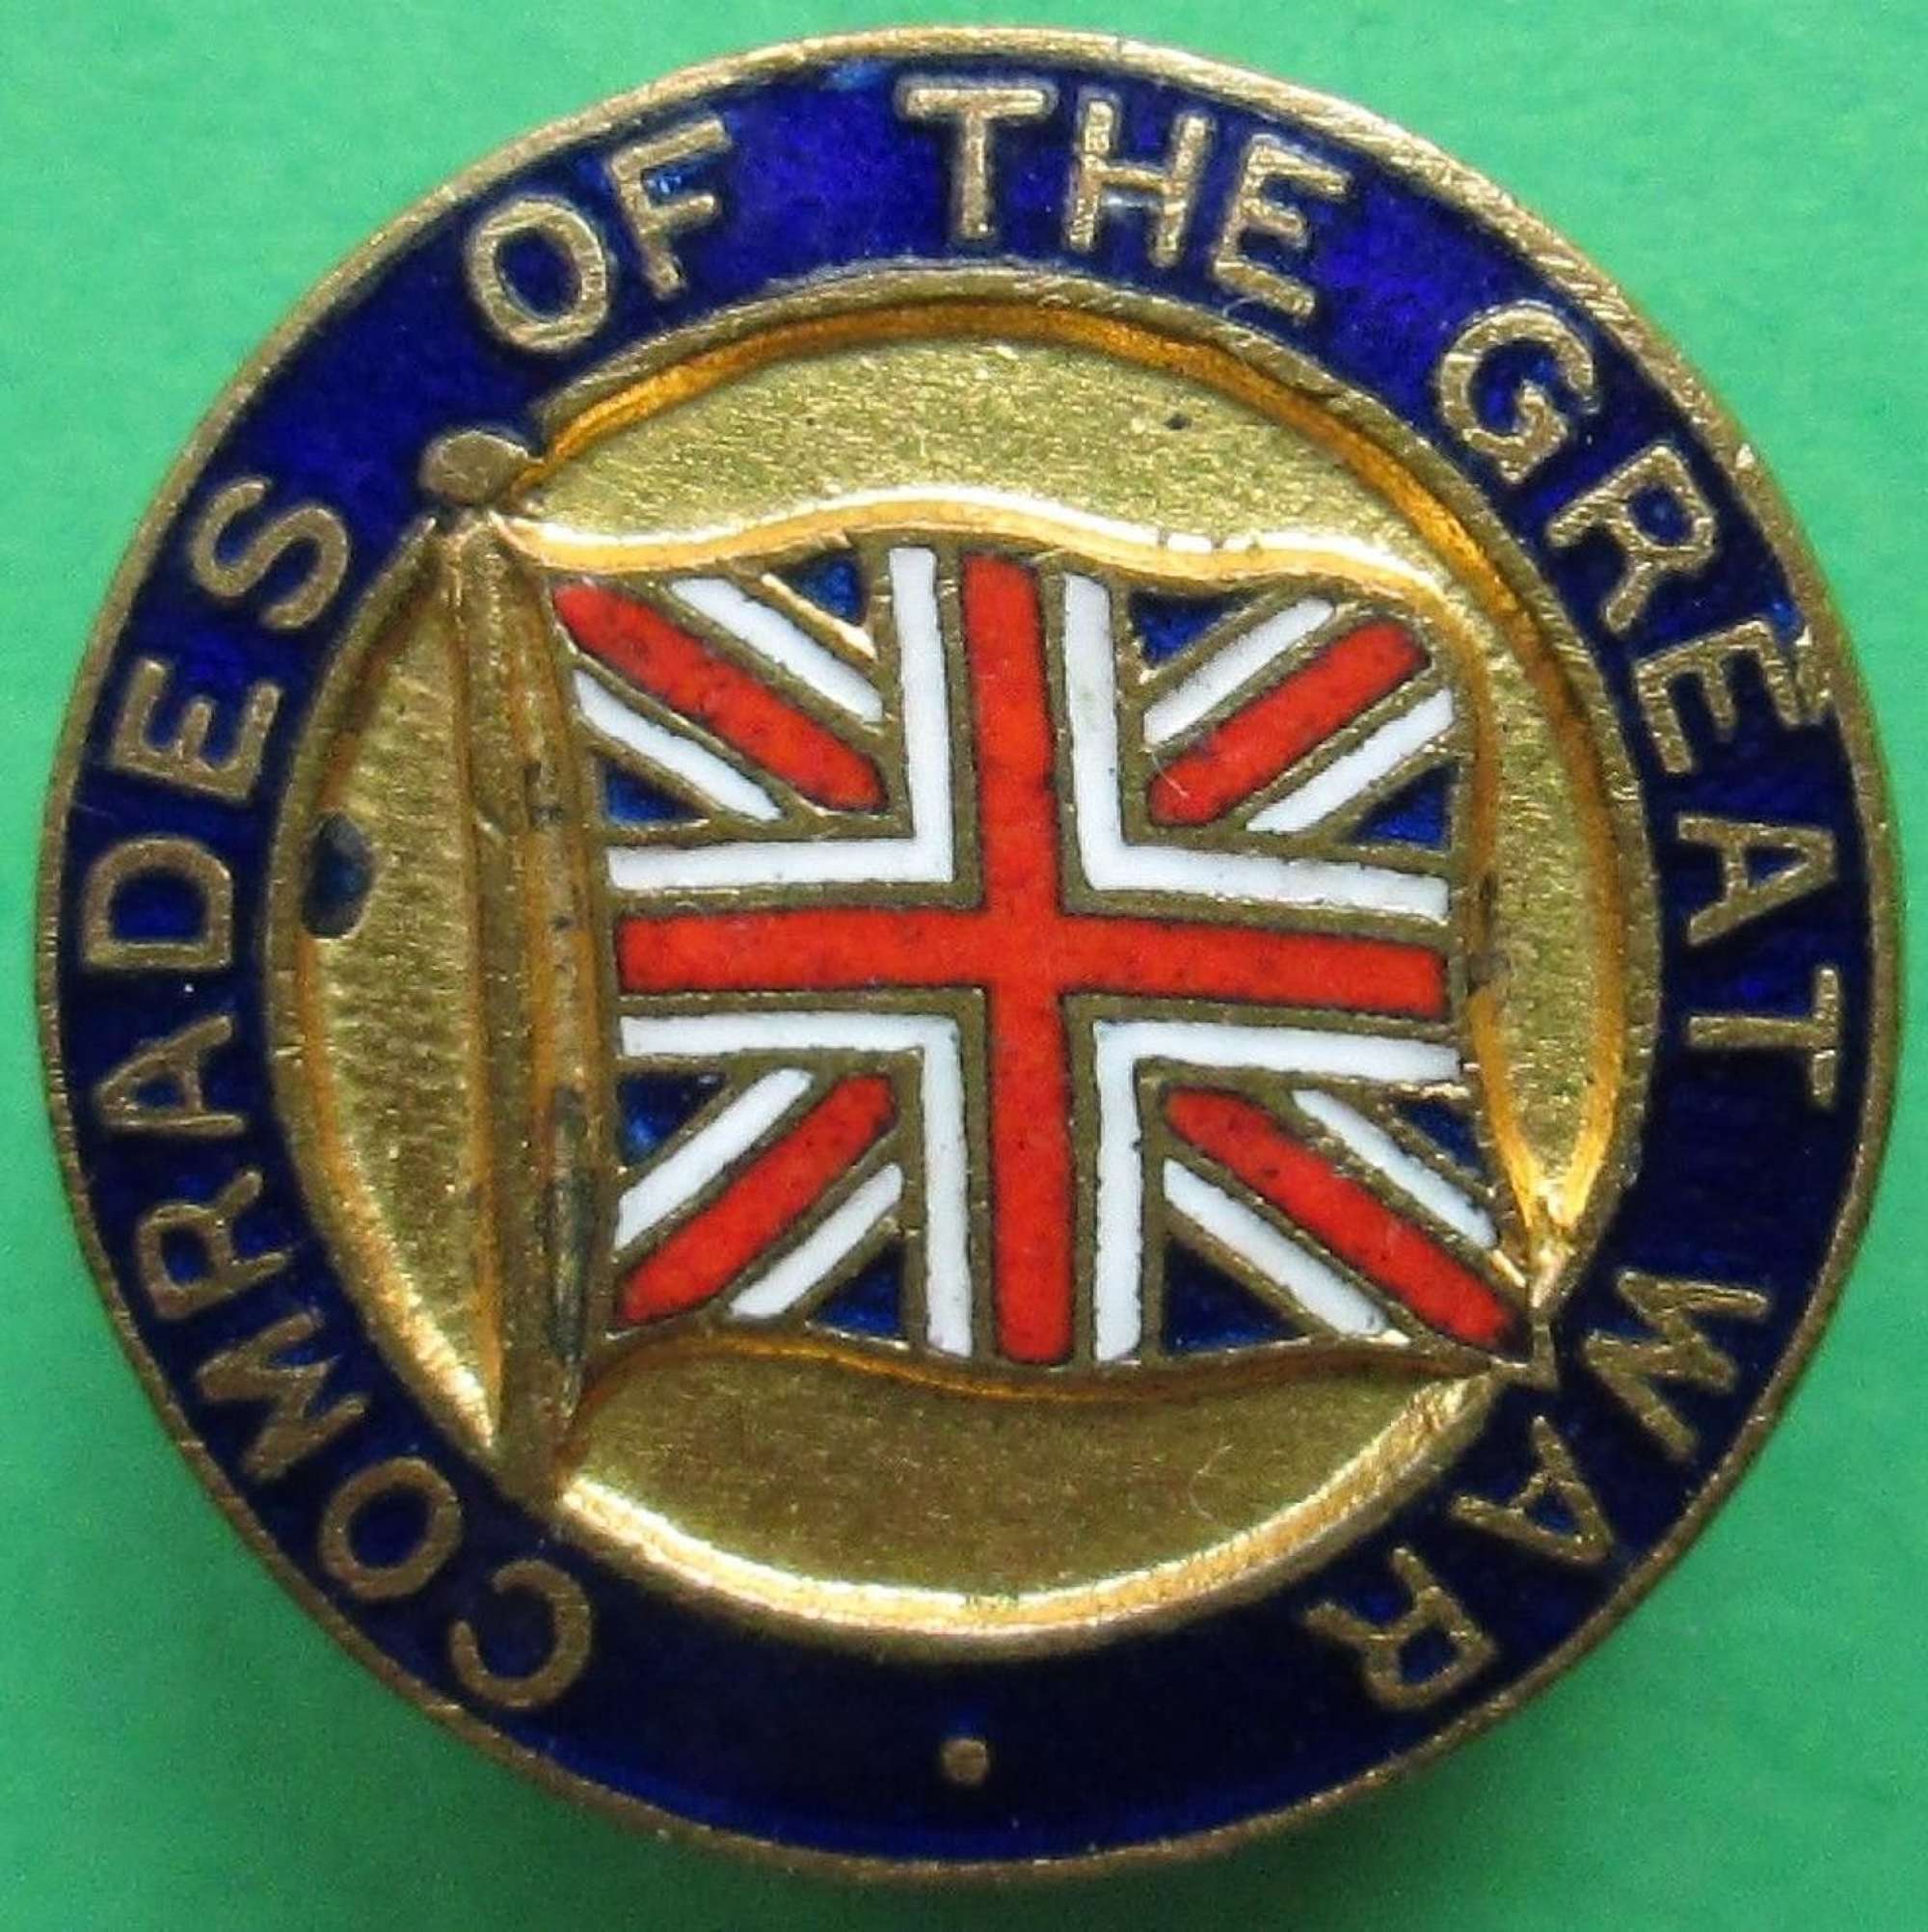 A WWI COMRADES OF THE GREAT WAR BADGE